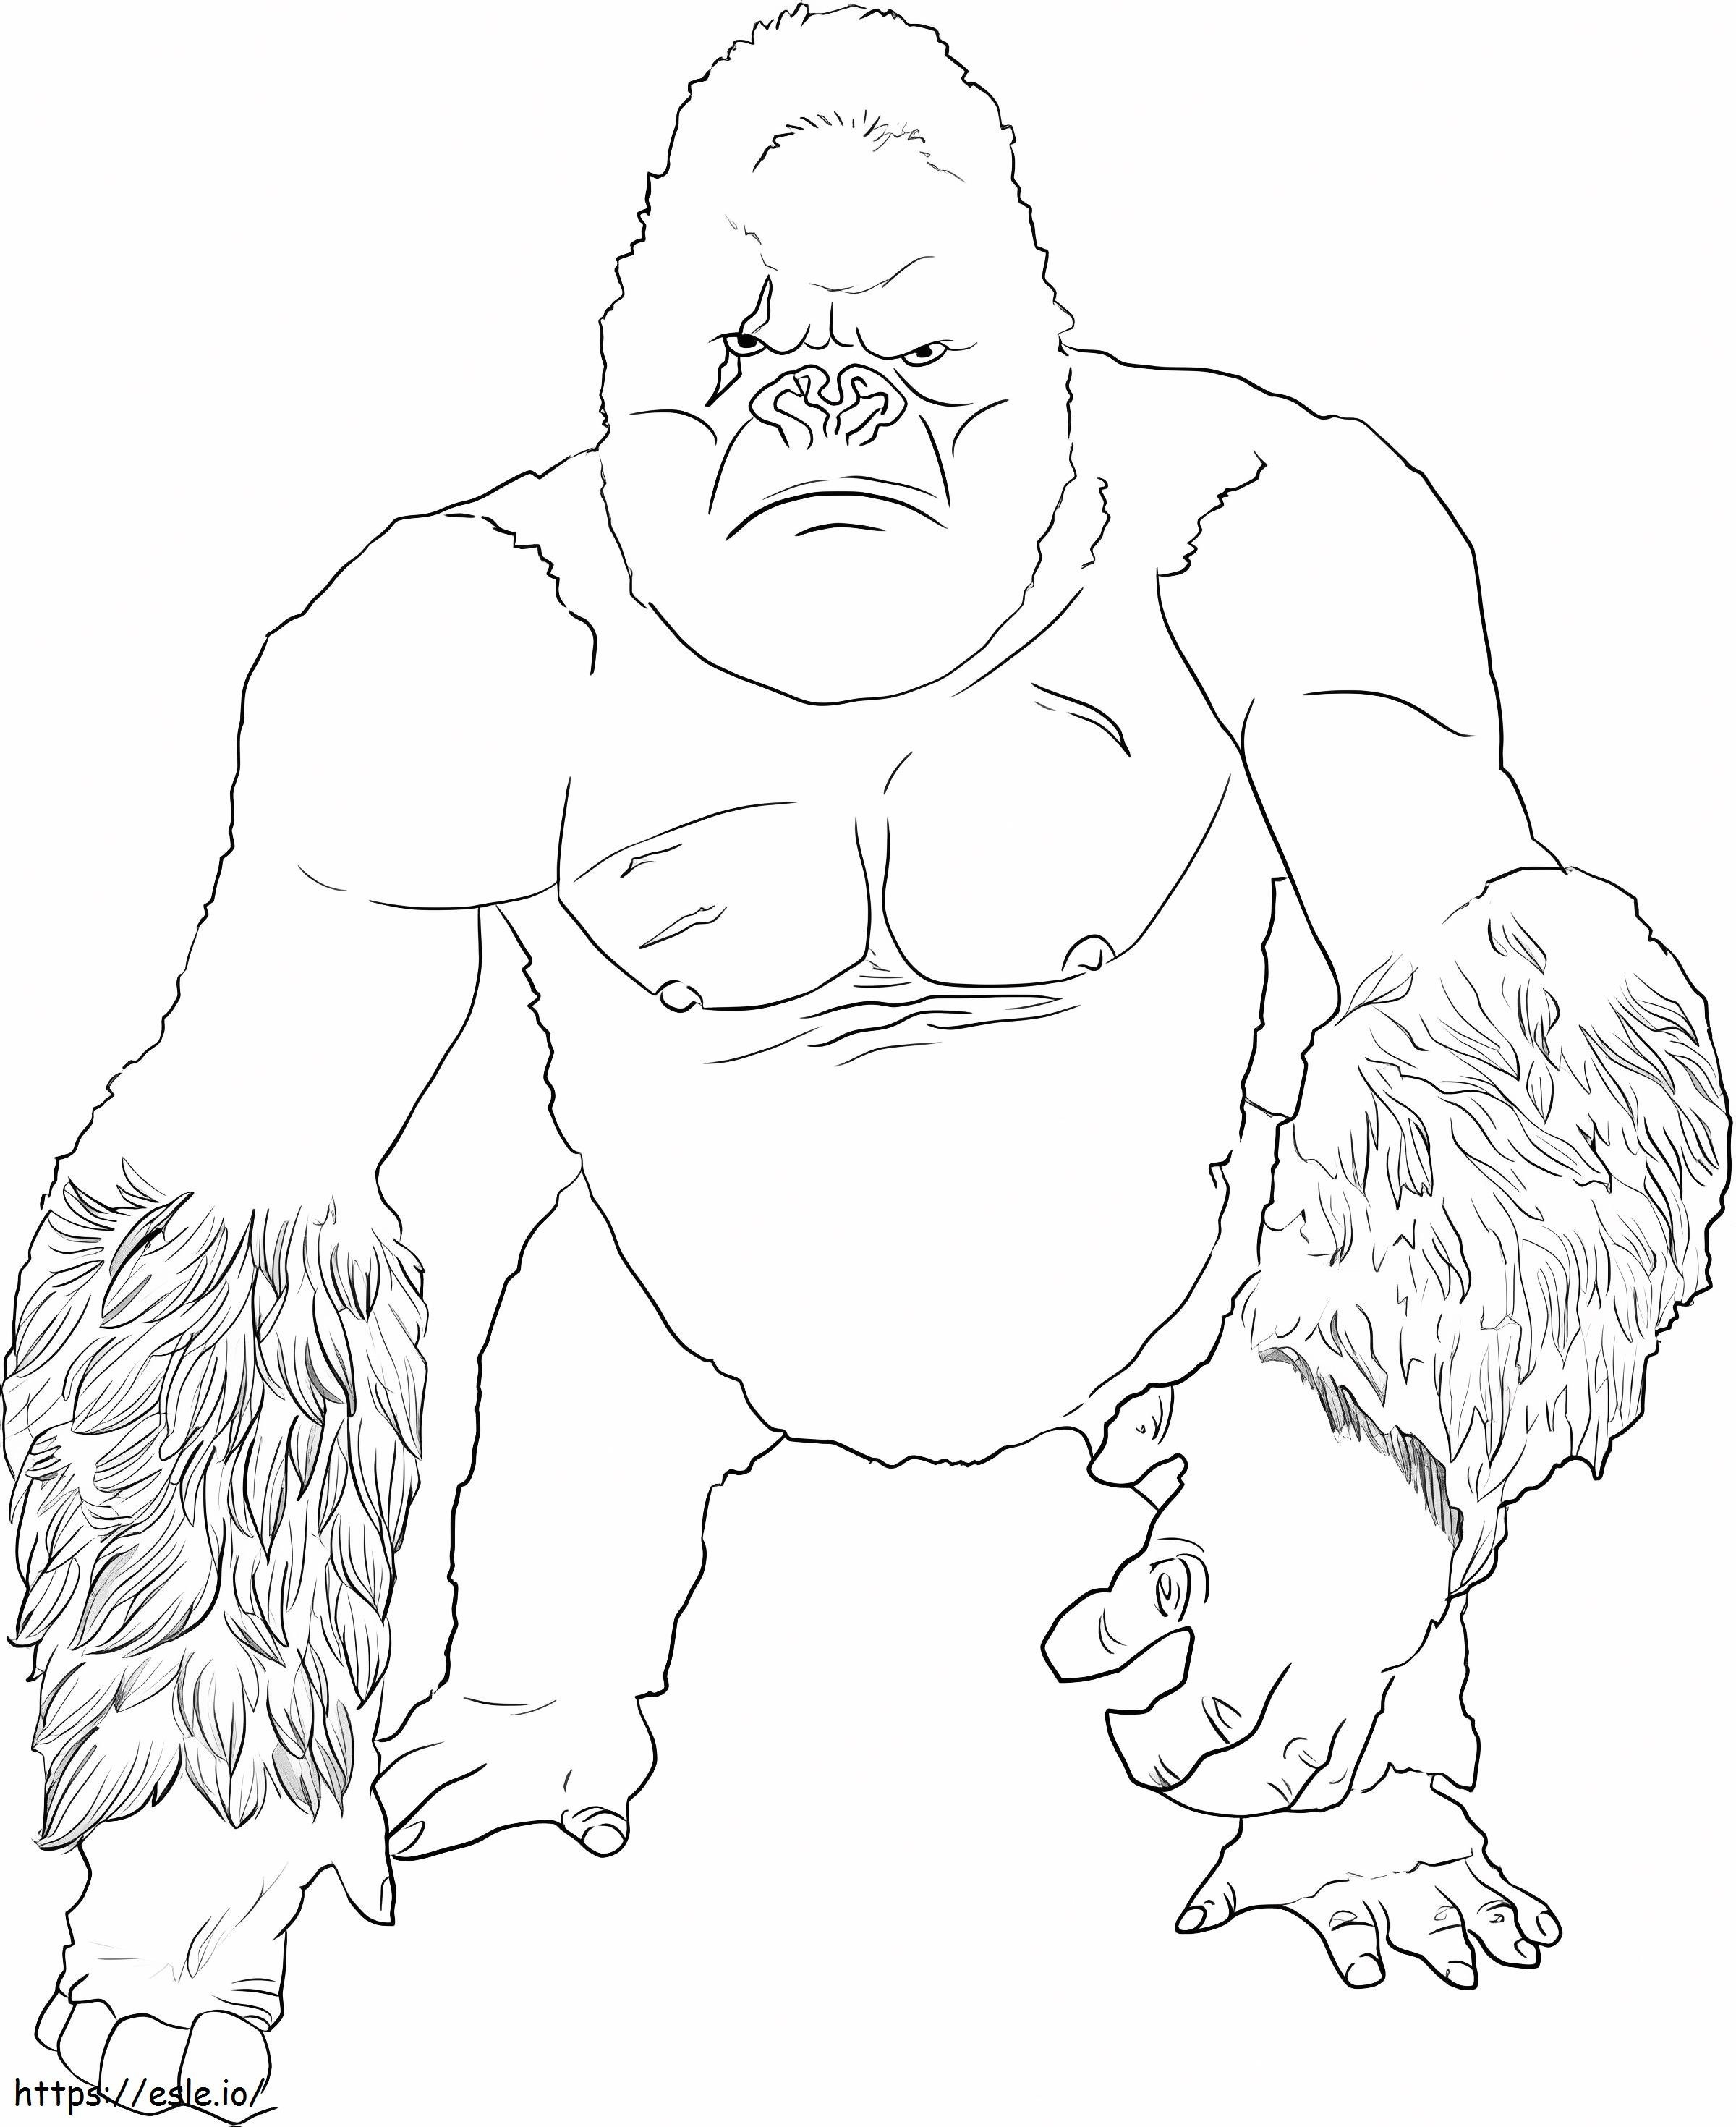 Graceful King Kong coloring page